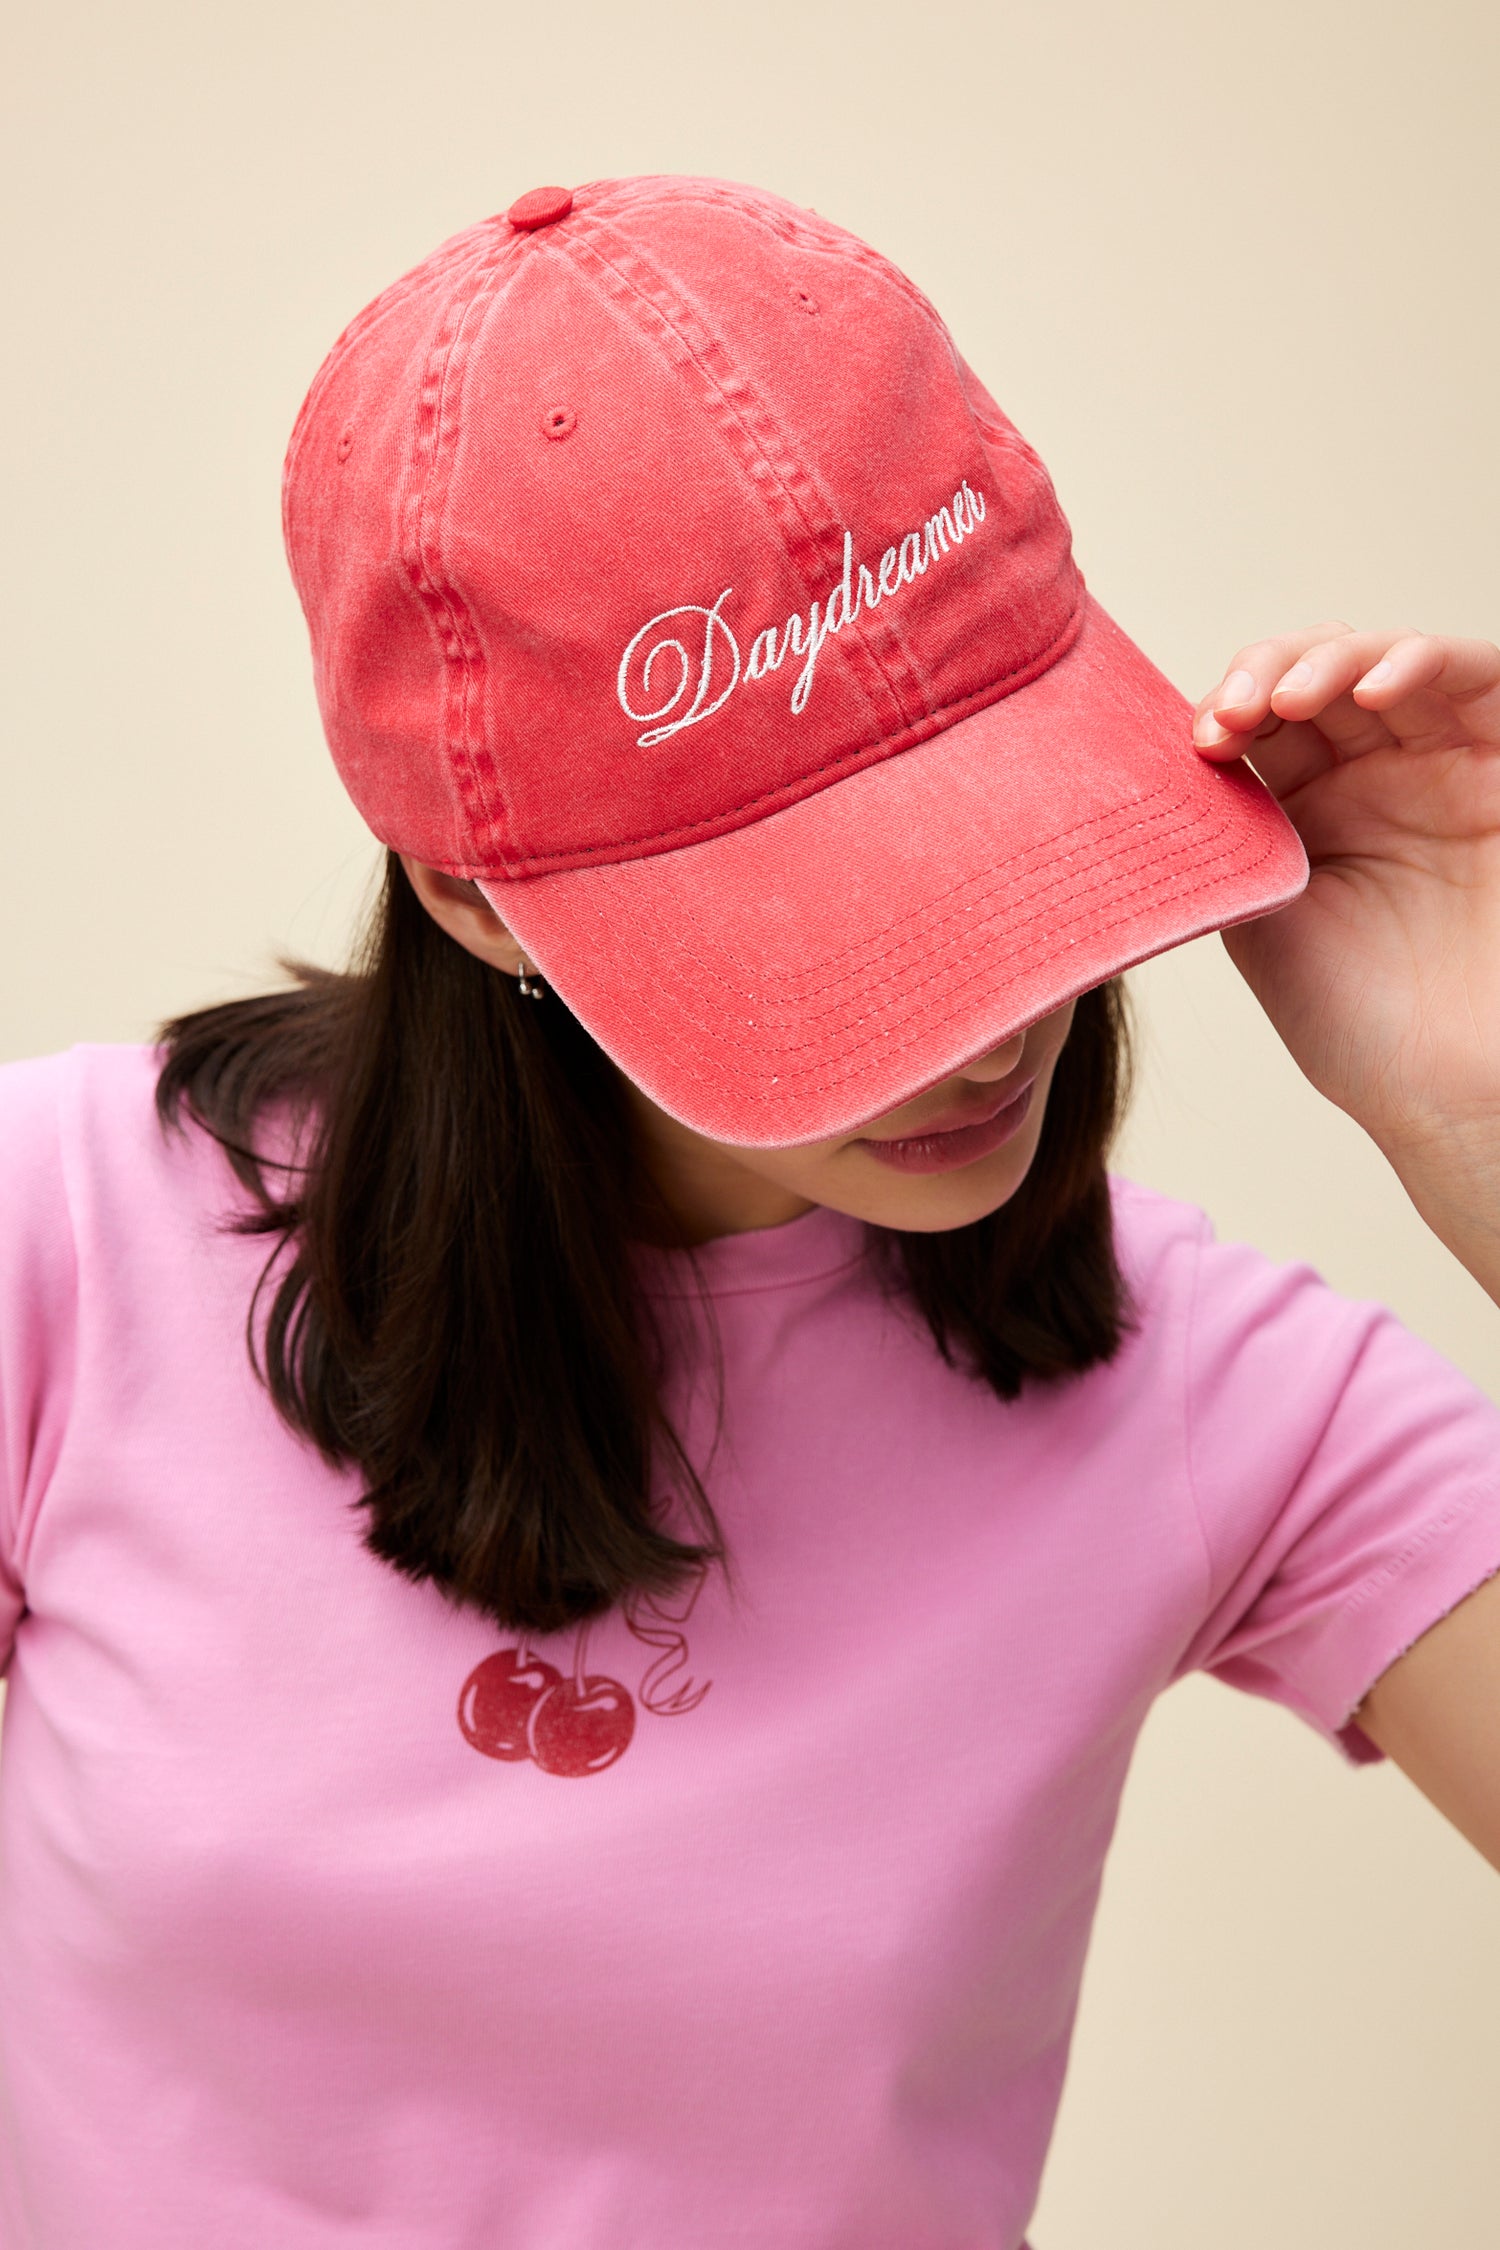 Model wearing a washed red denim dad hat with 'Daydreamer' logo script embroidered on the front.